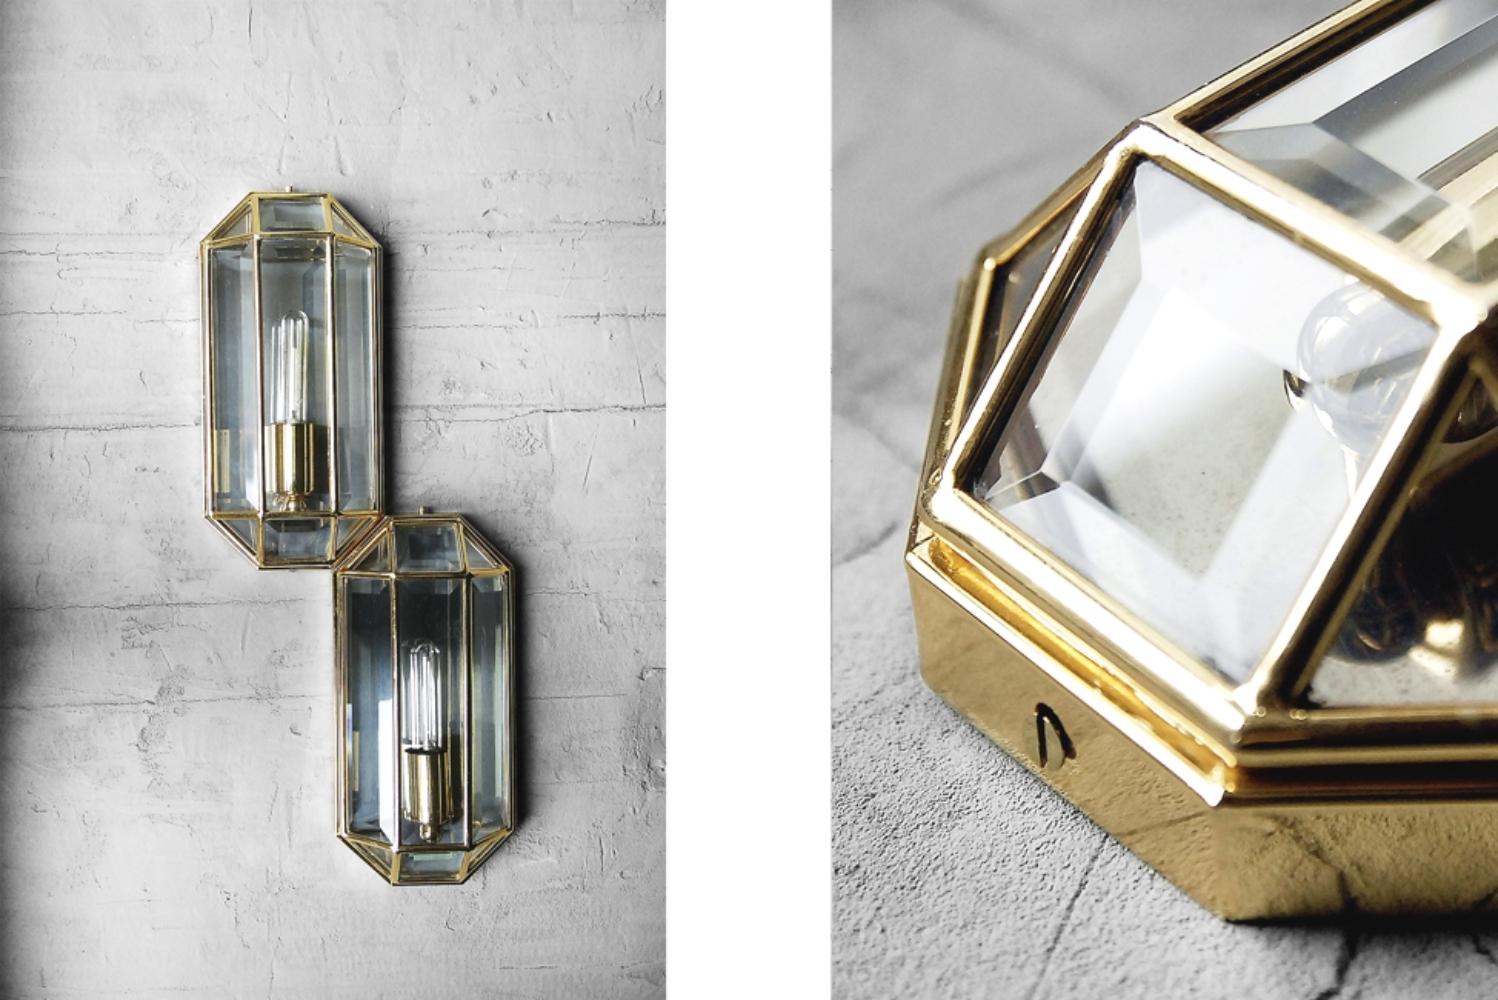 This set of two geometric wall lamps was manufactured in Italy during the 1970s. It has a three-dimensional form. The tiles are made from milled glass and the frame is made from brass. This set is in original vintage condition and has a patine and